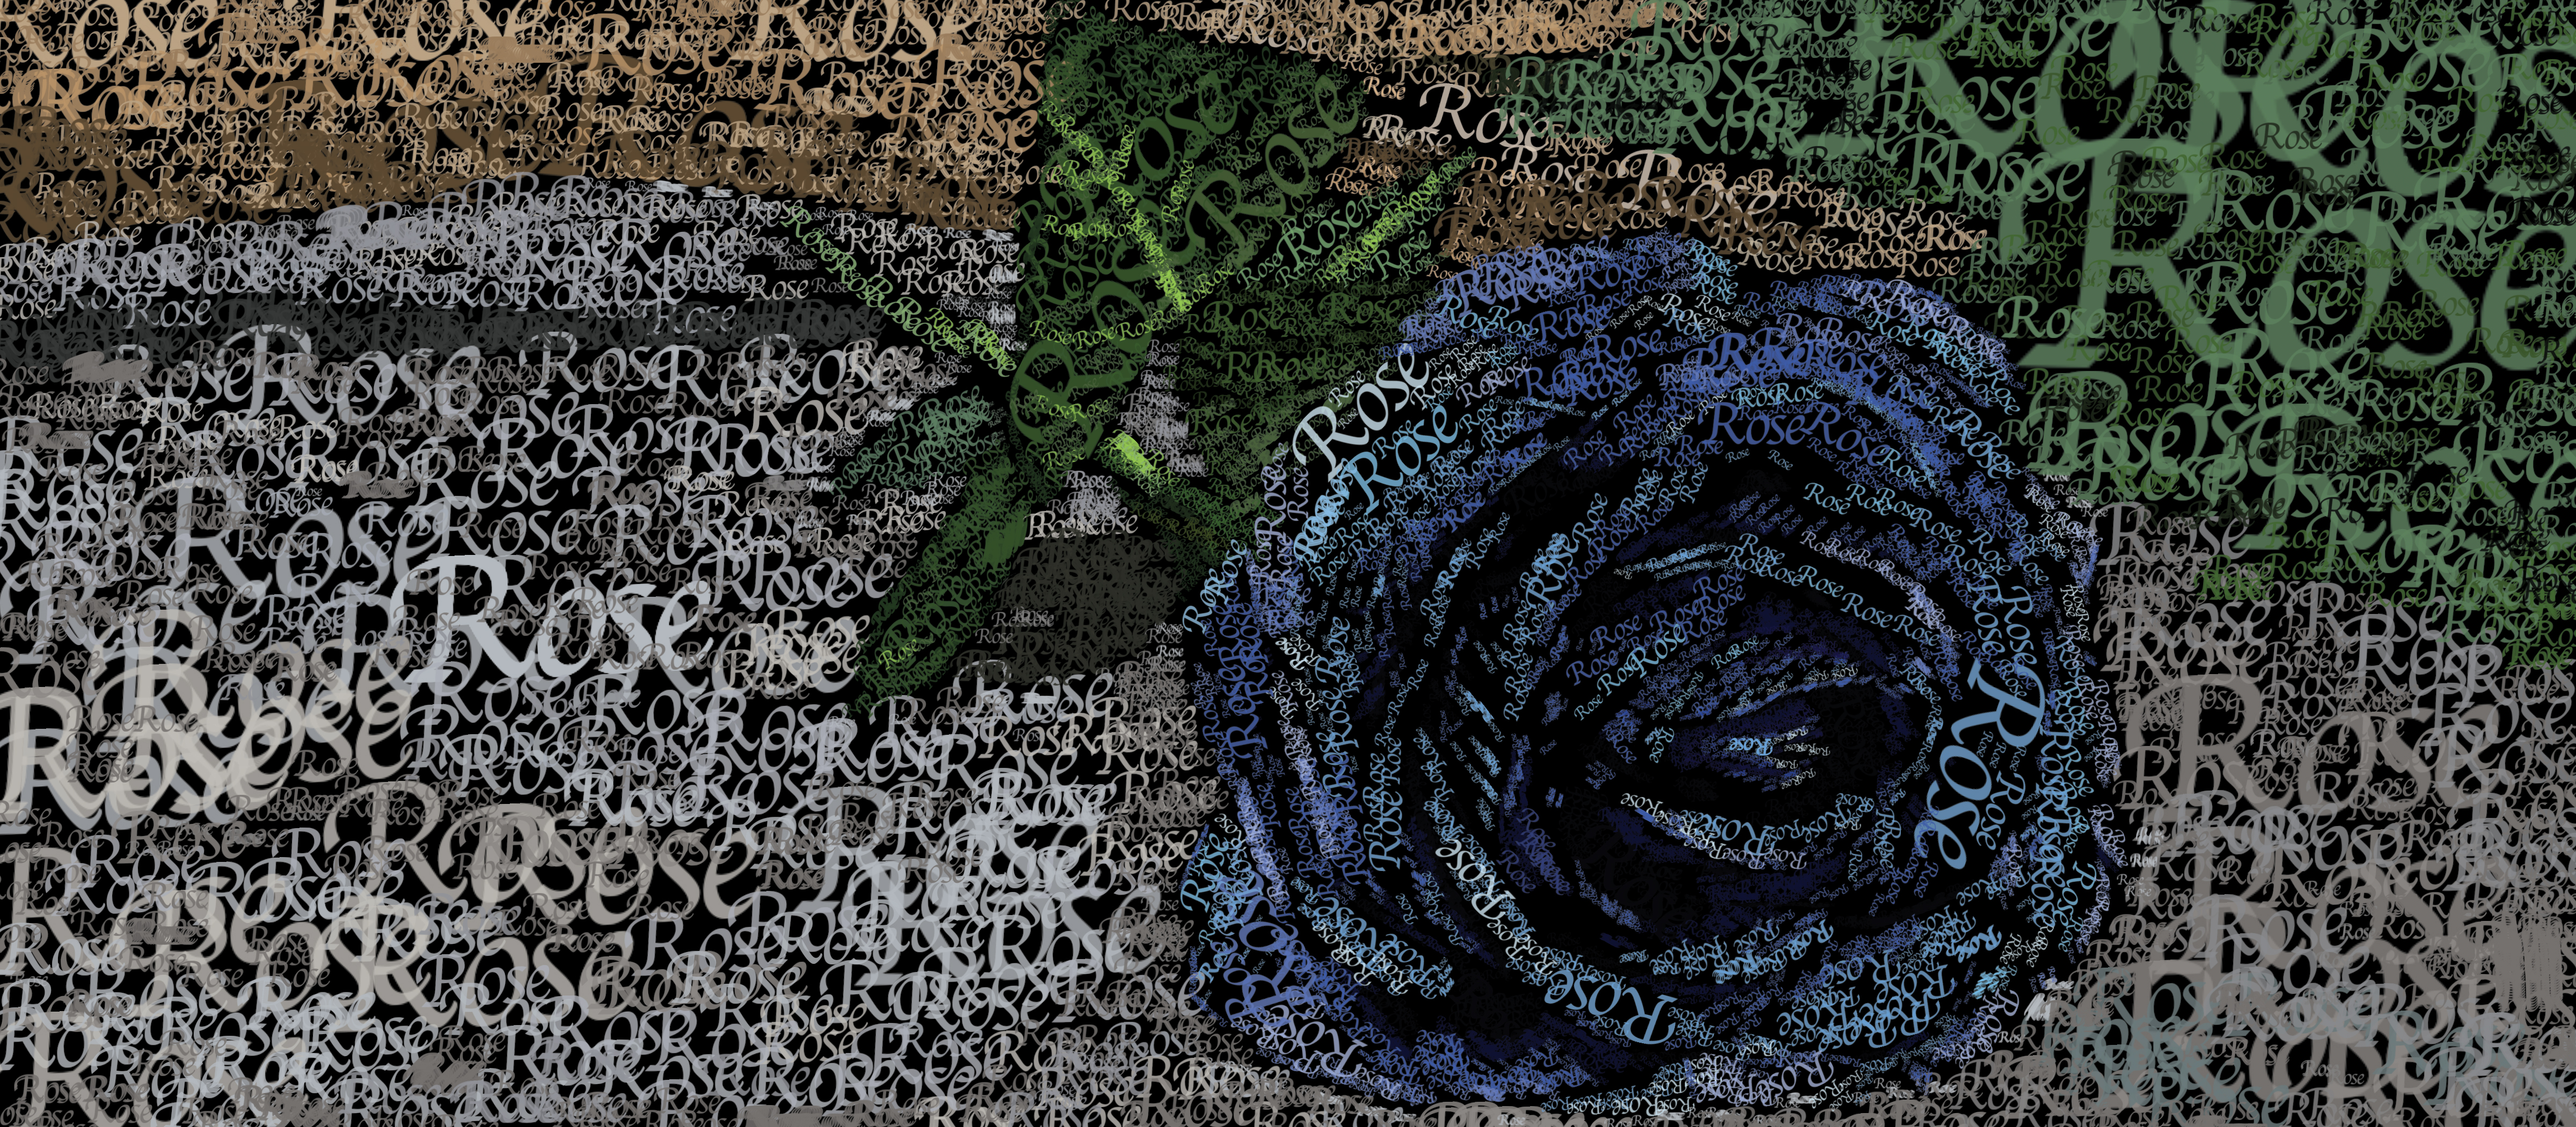 Typography of a blue rose